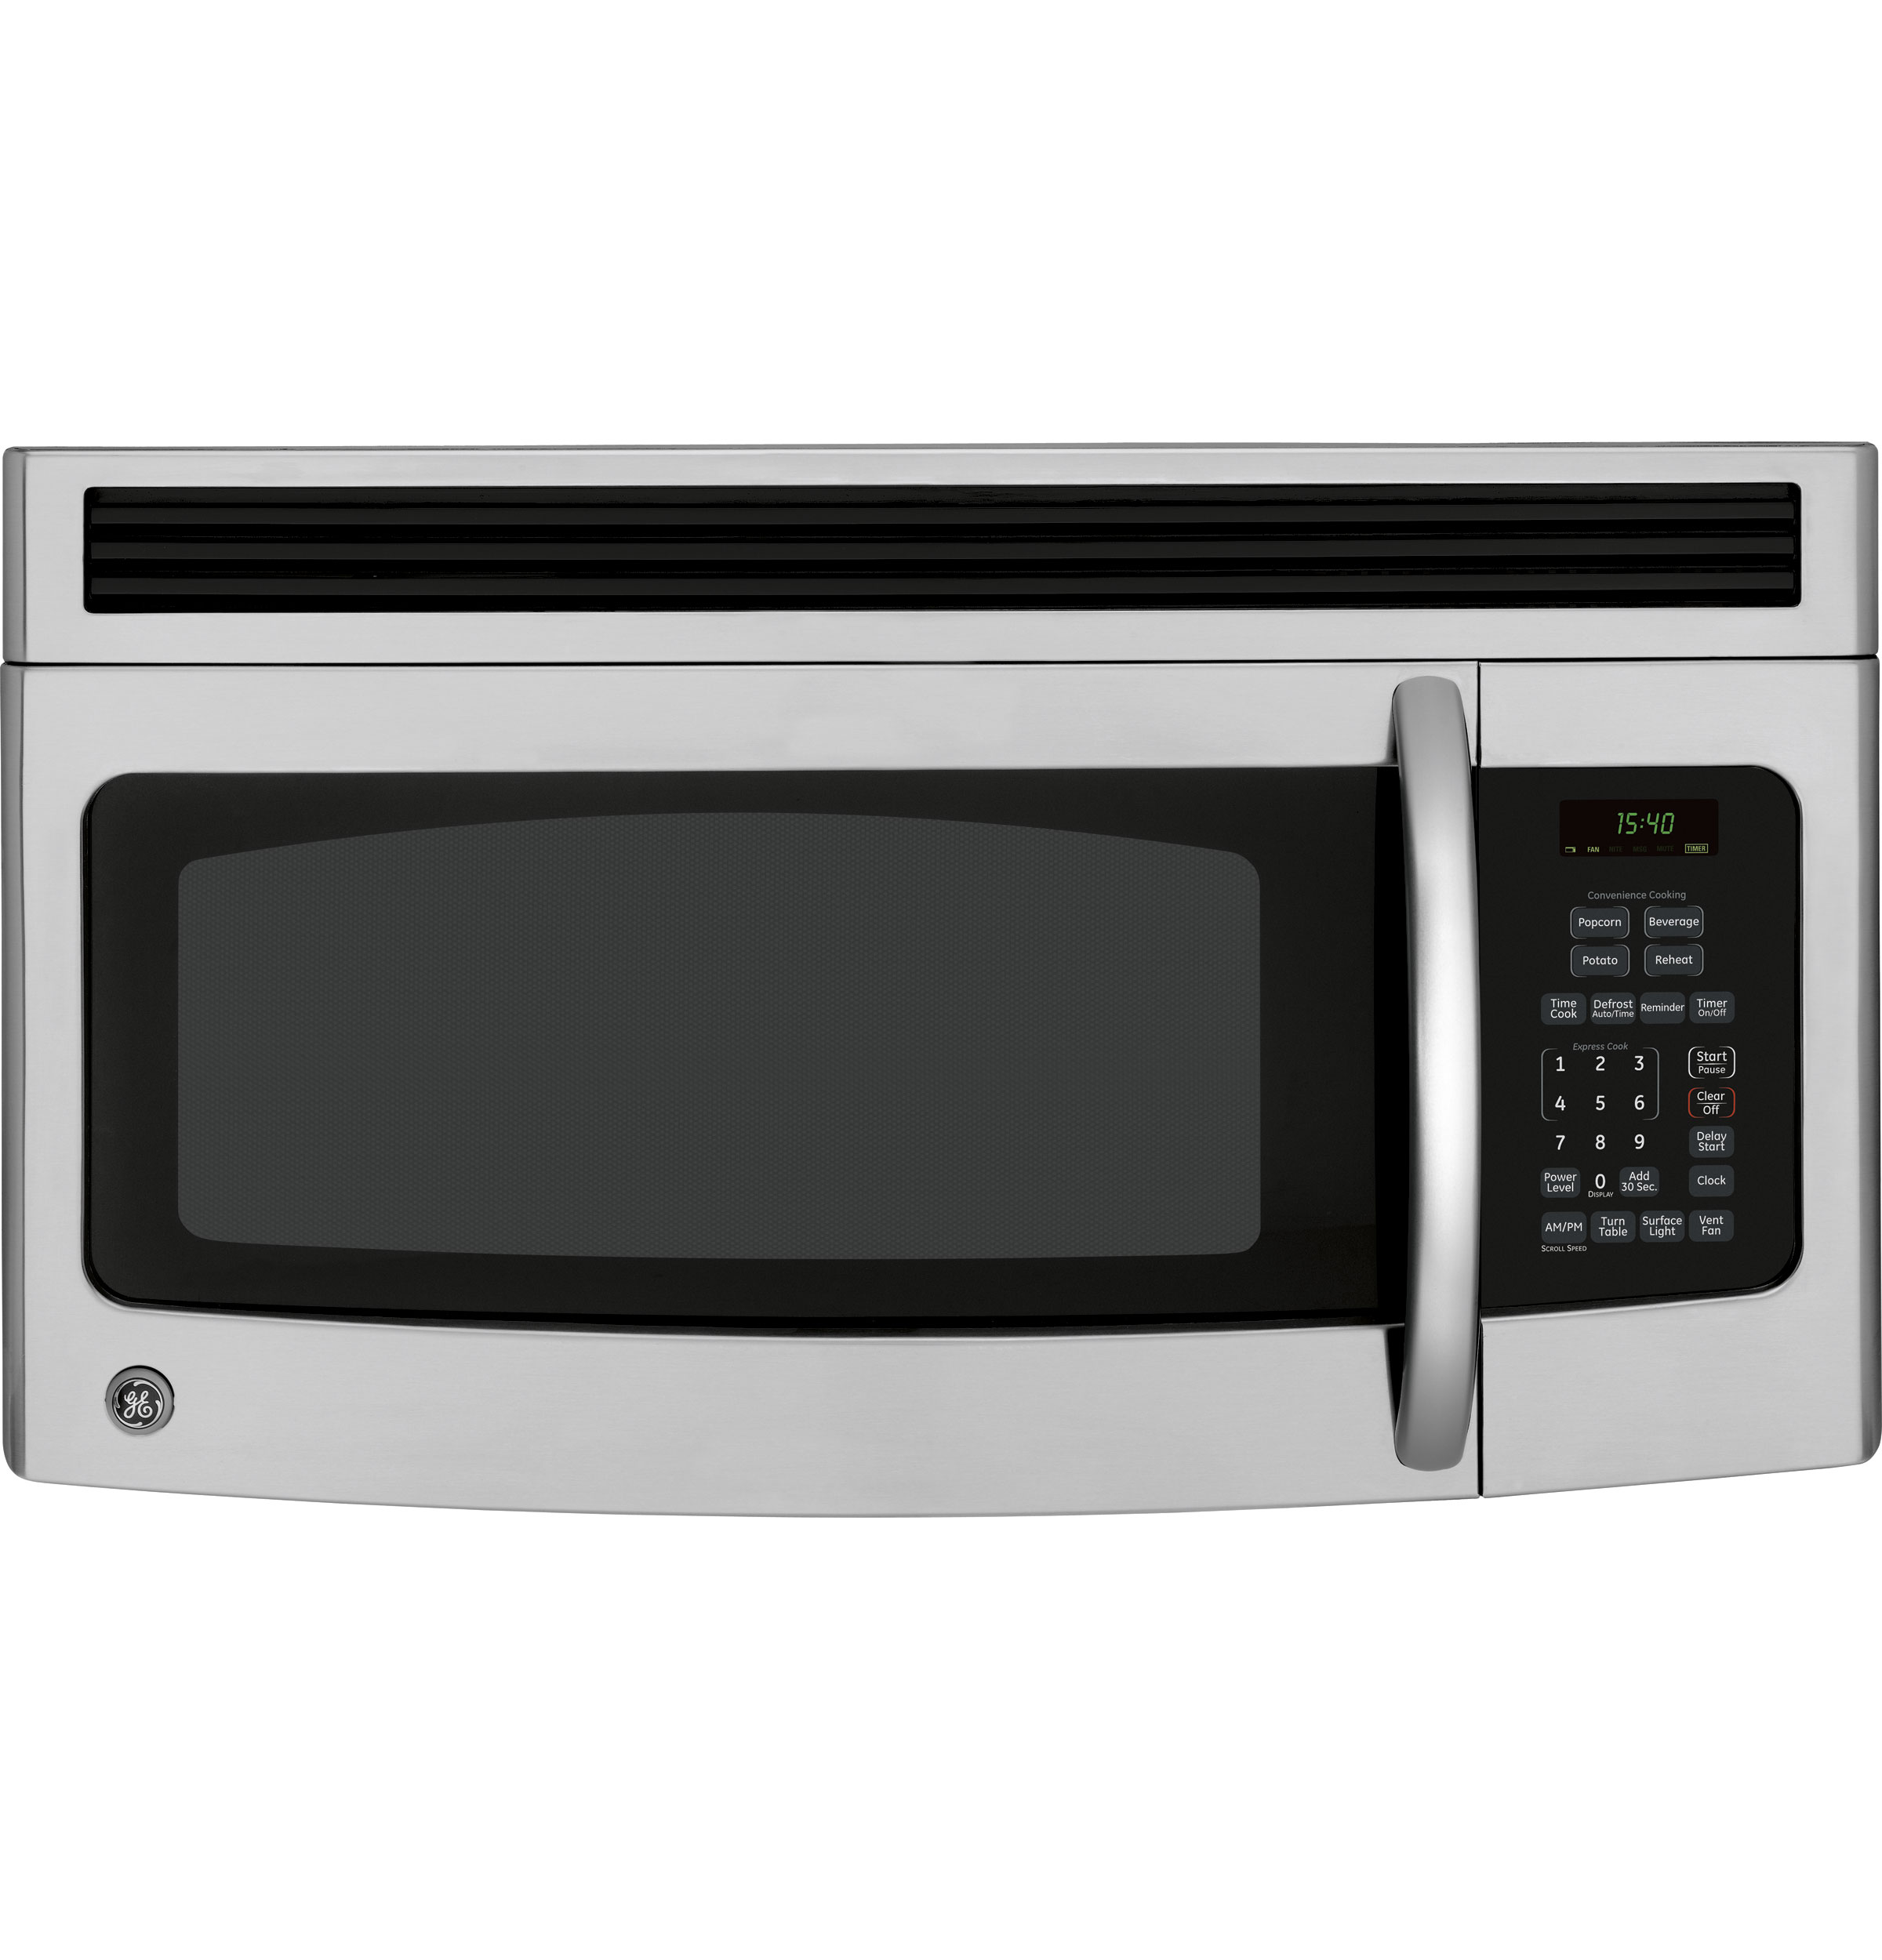 General Electric Jnm1541smss 1 5 Cu Ft Over The Range Microwave